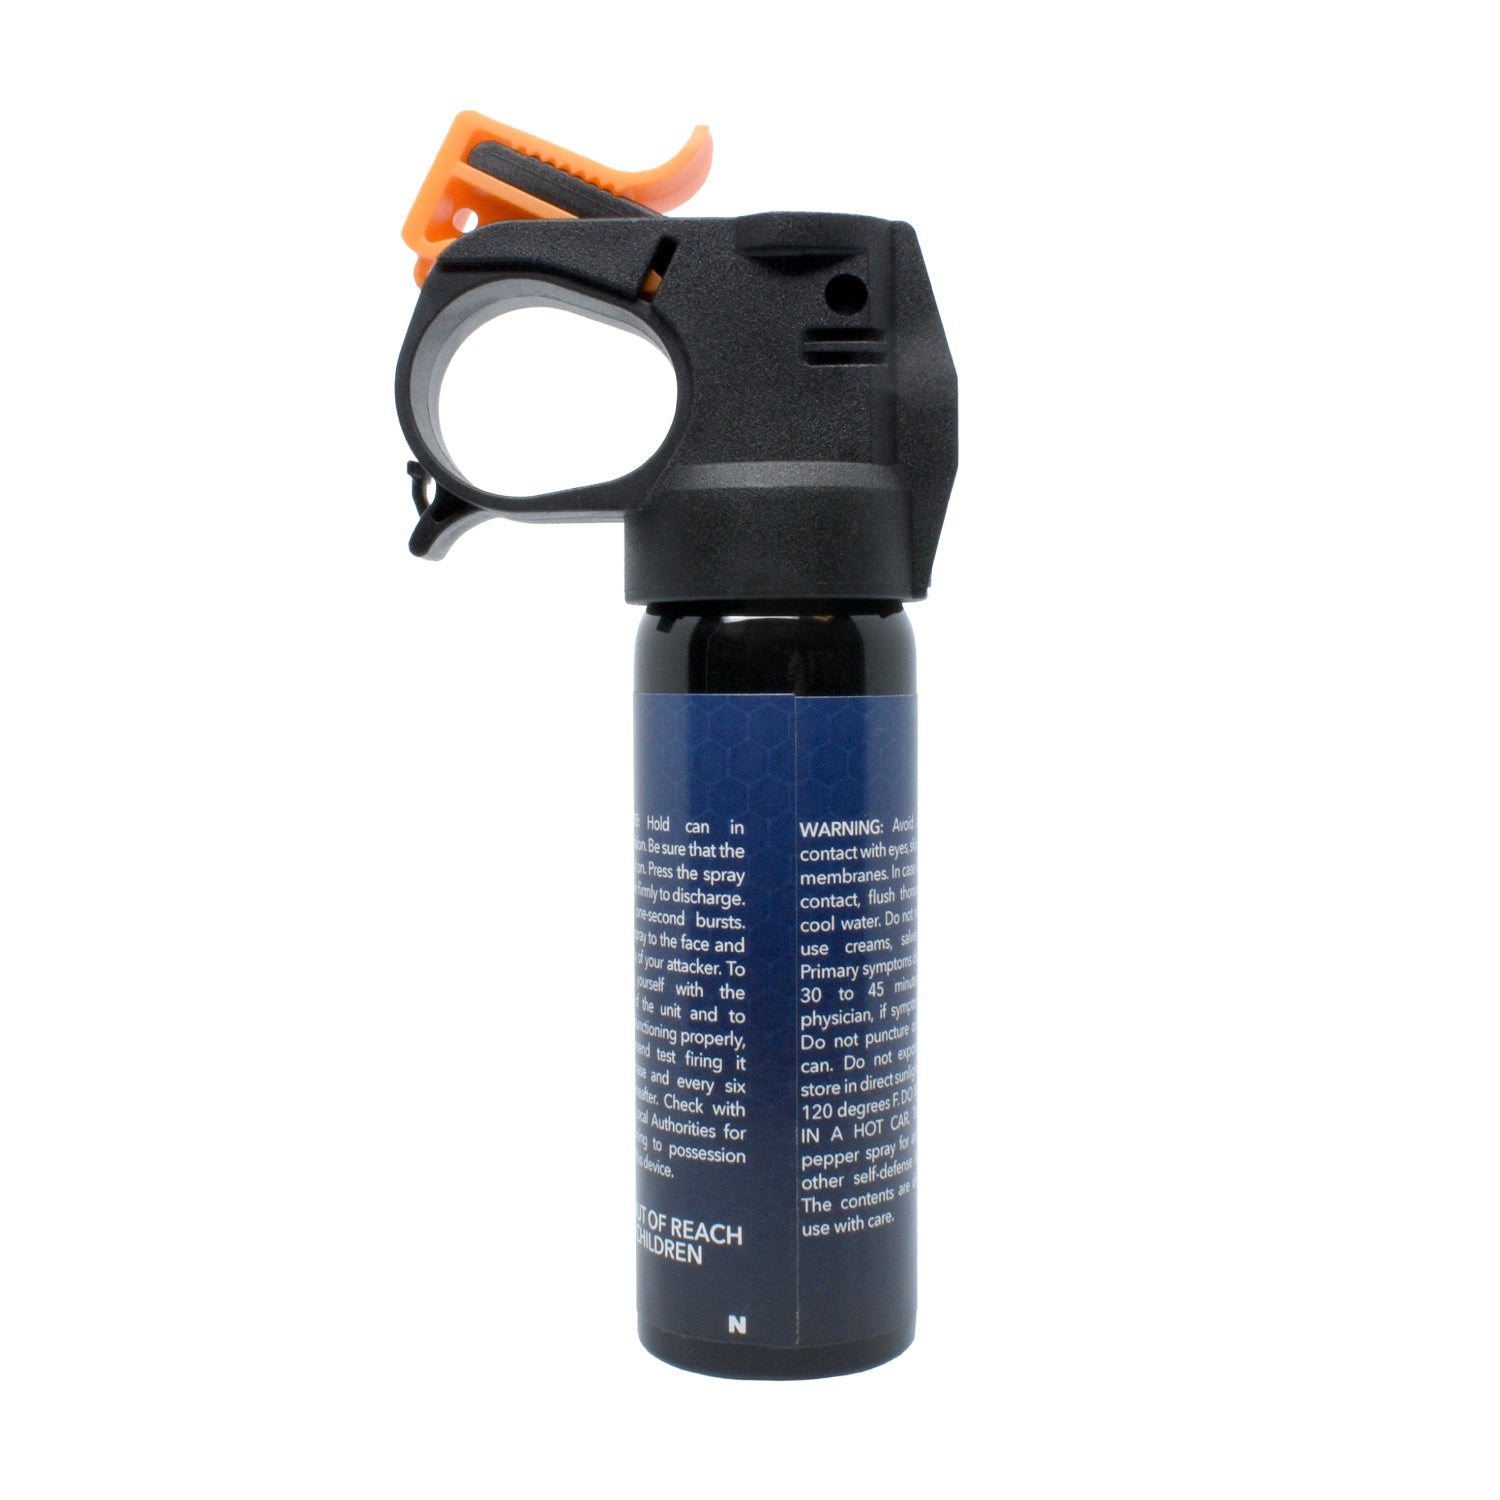 Police Force 23 Pepper Spray Fire Master